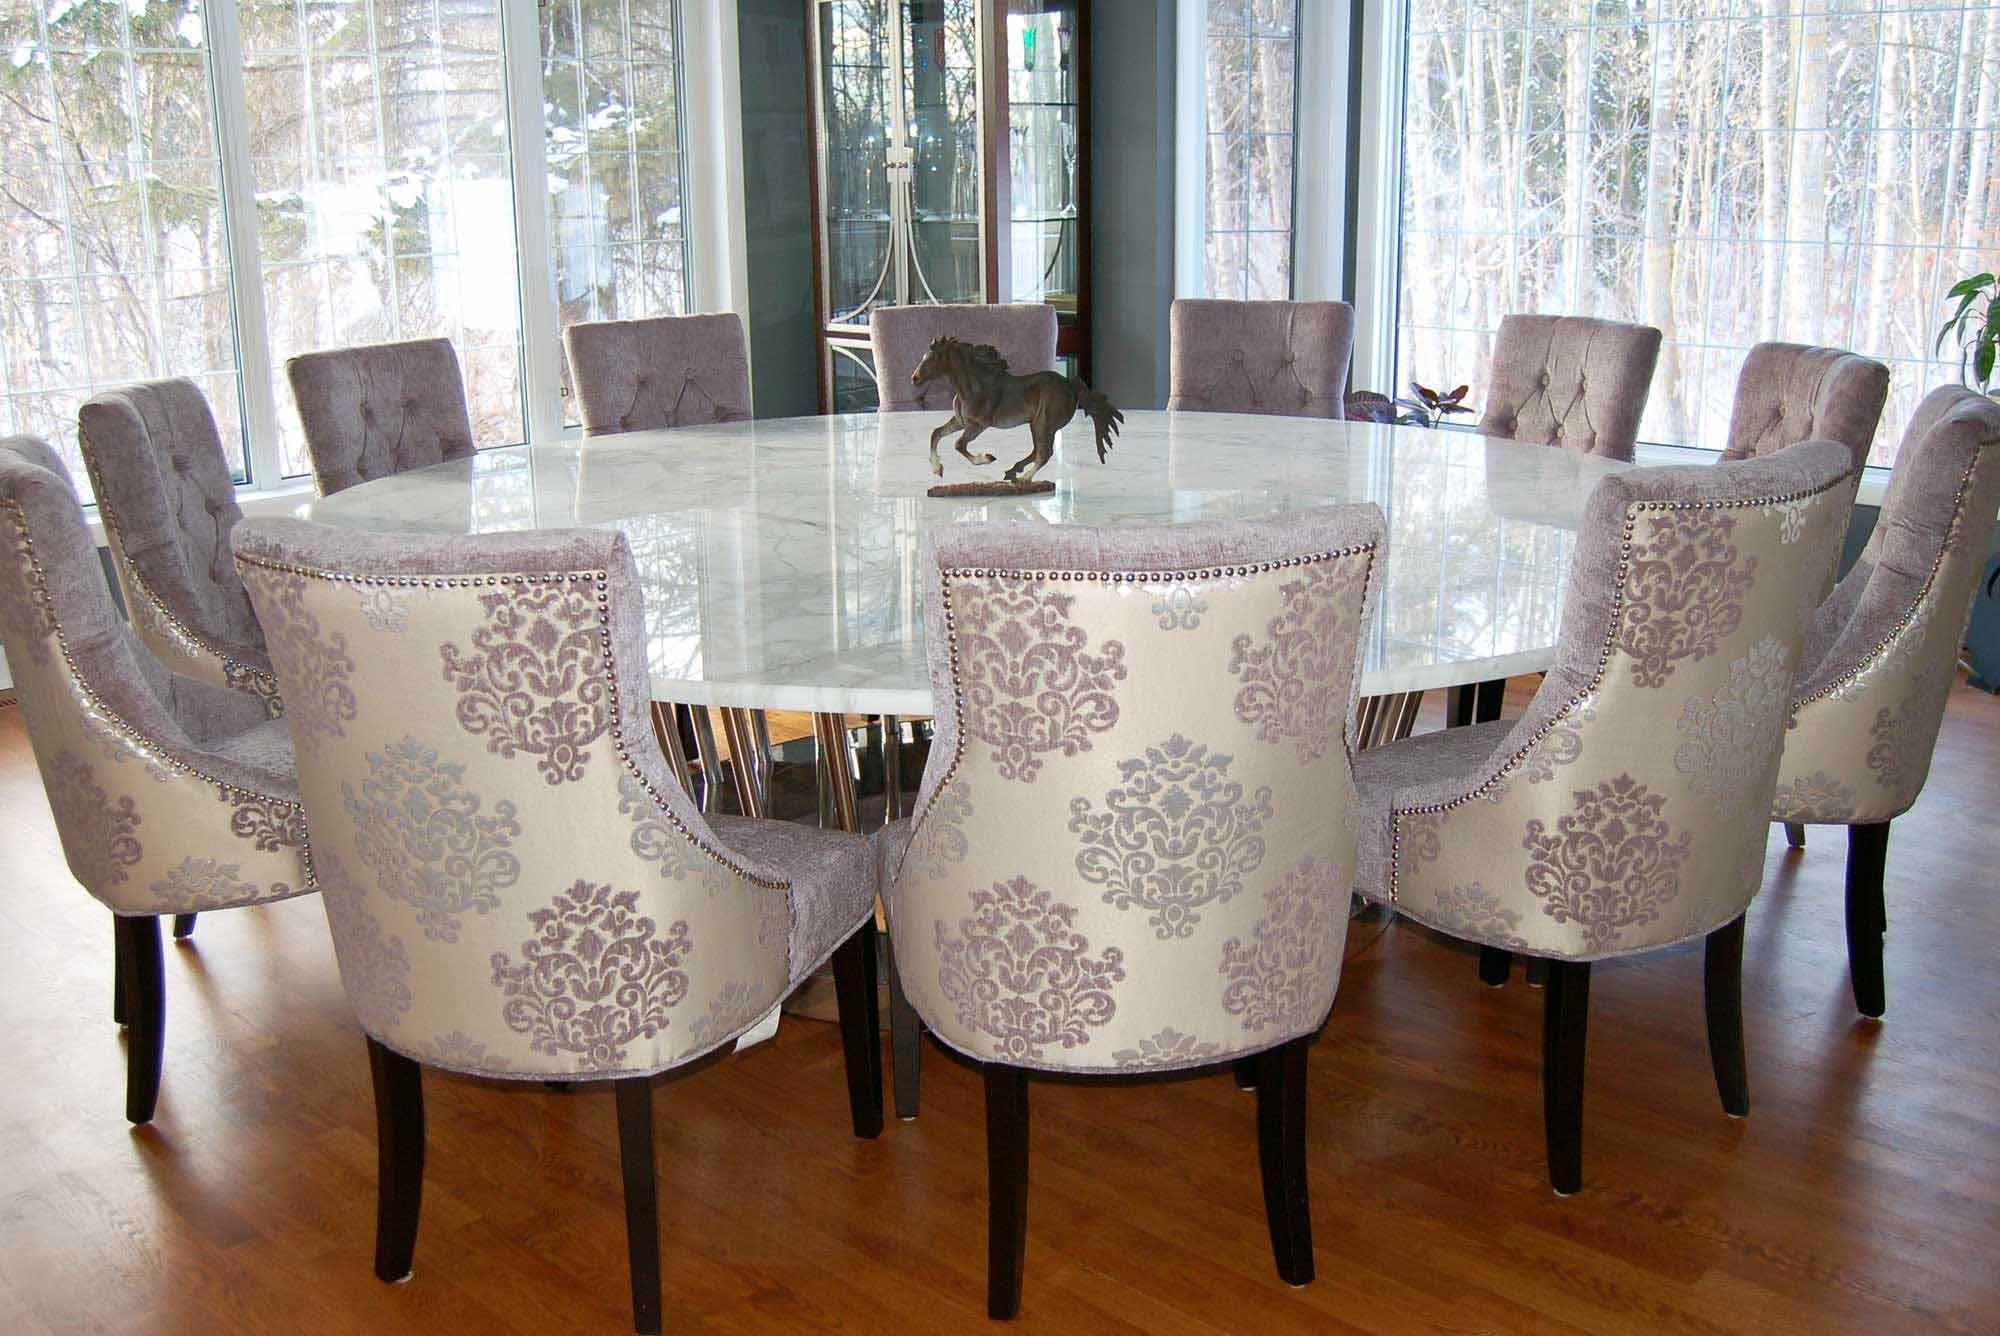 Formal Dining Room Sets Visualhunt, Round Formal Dining Room Sets For 8 Persons